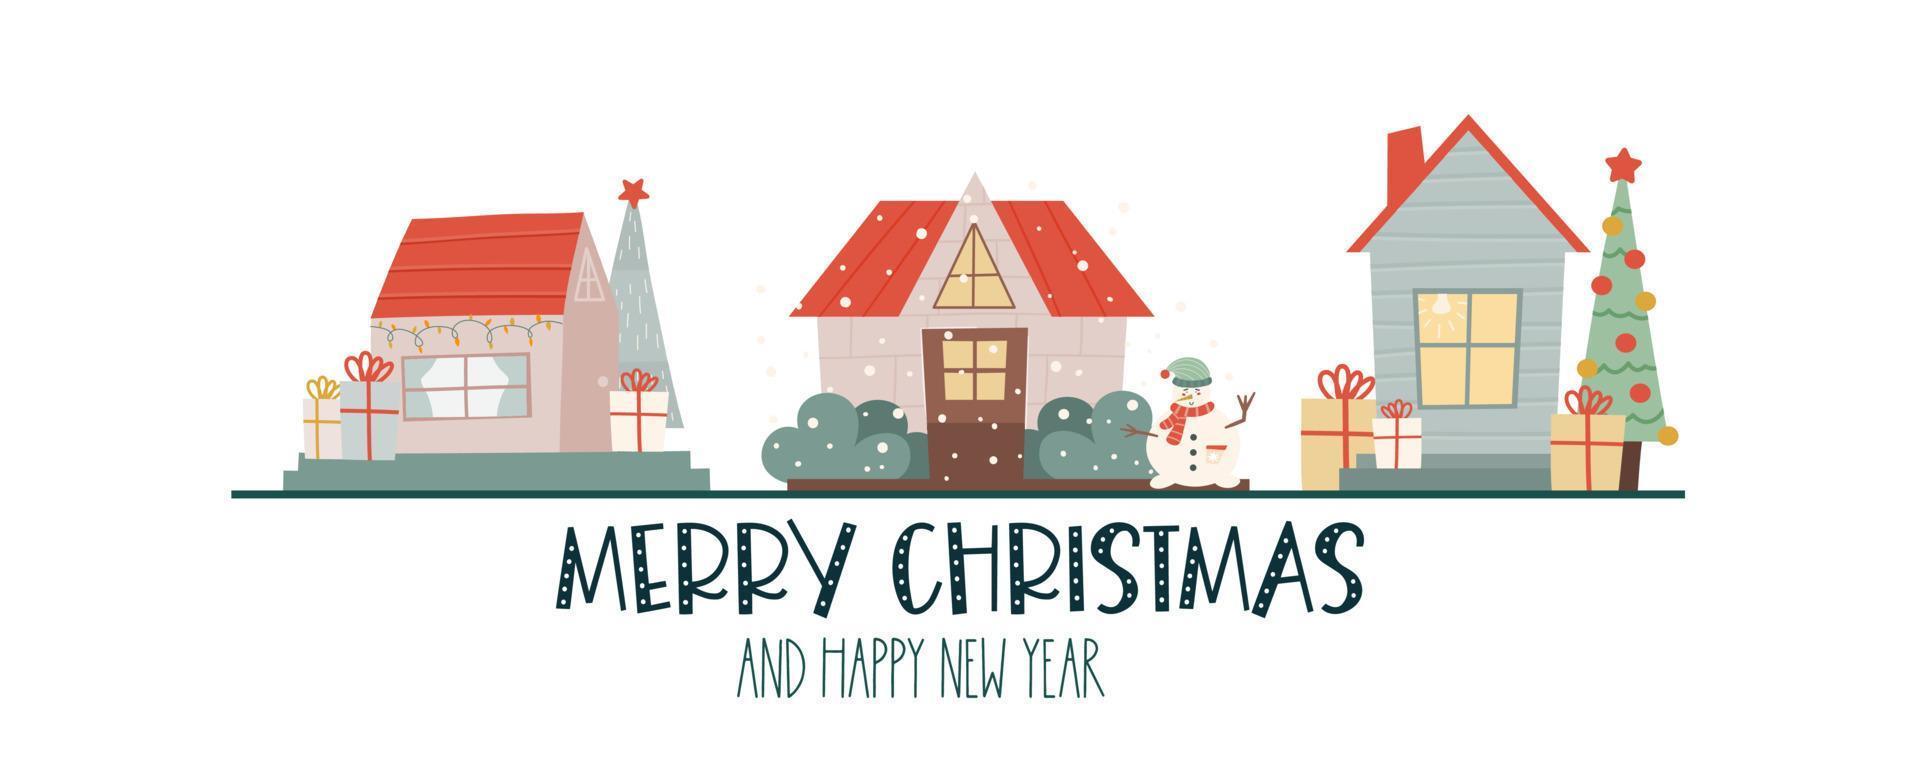 Christmas banner with winter houses and text merry christmas.Winter card with cute houses, tree, a snowman and gifts on a white background. Vector illustration in flat style.